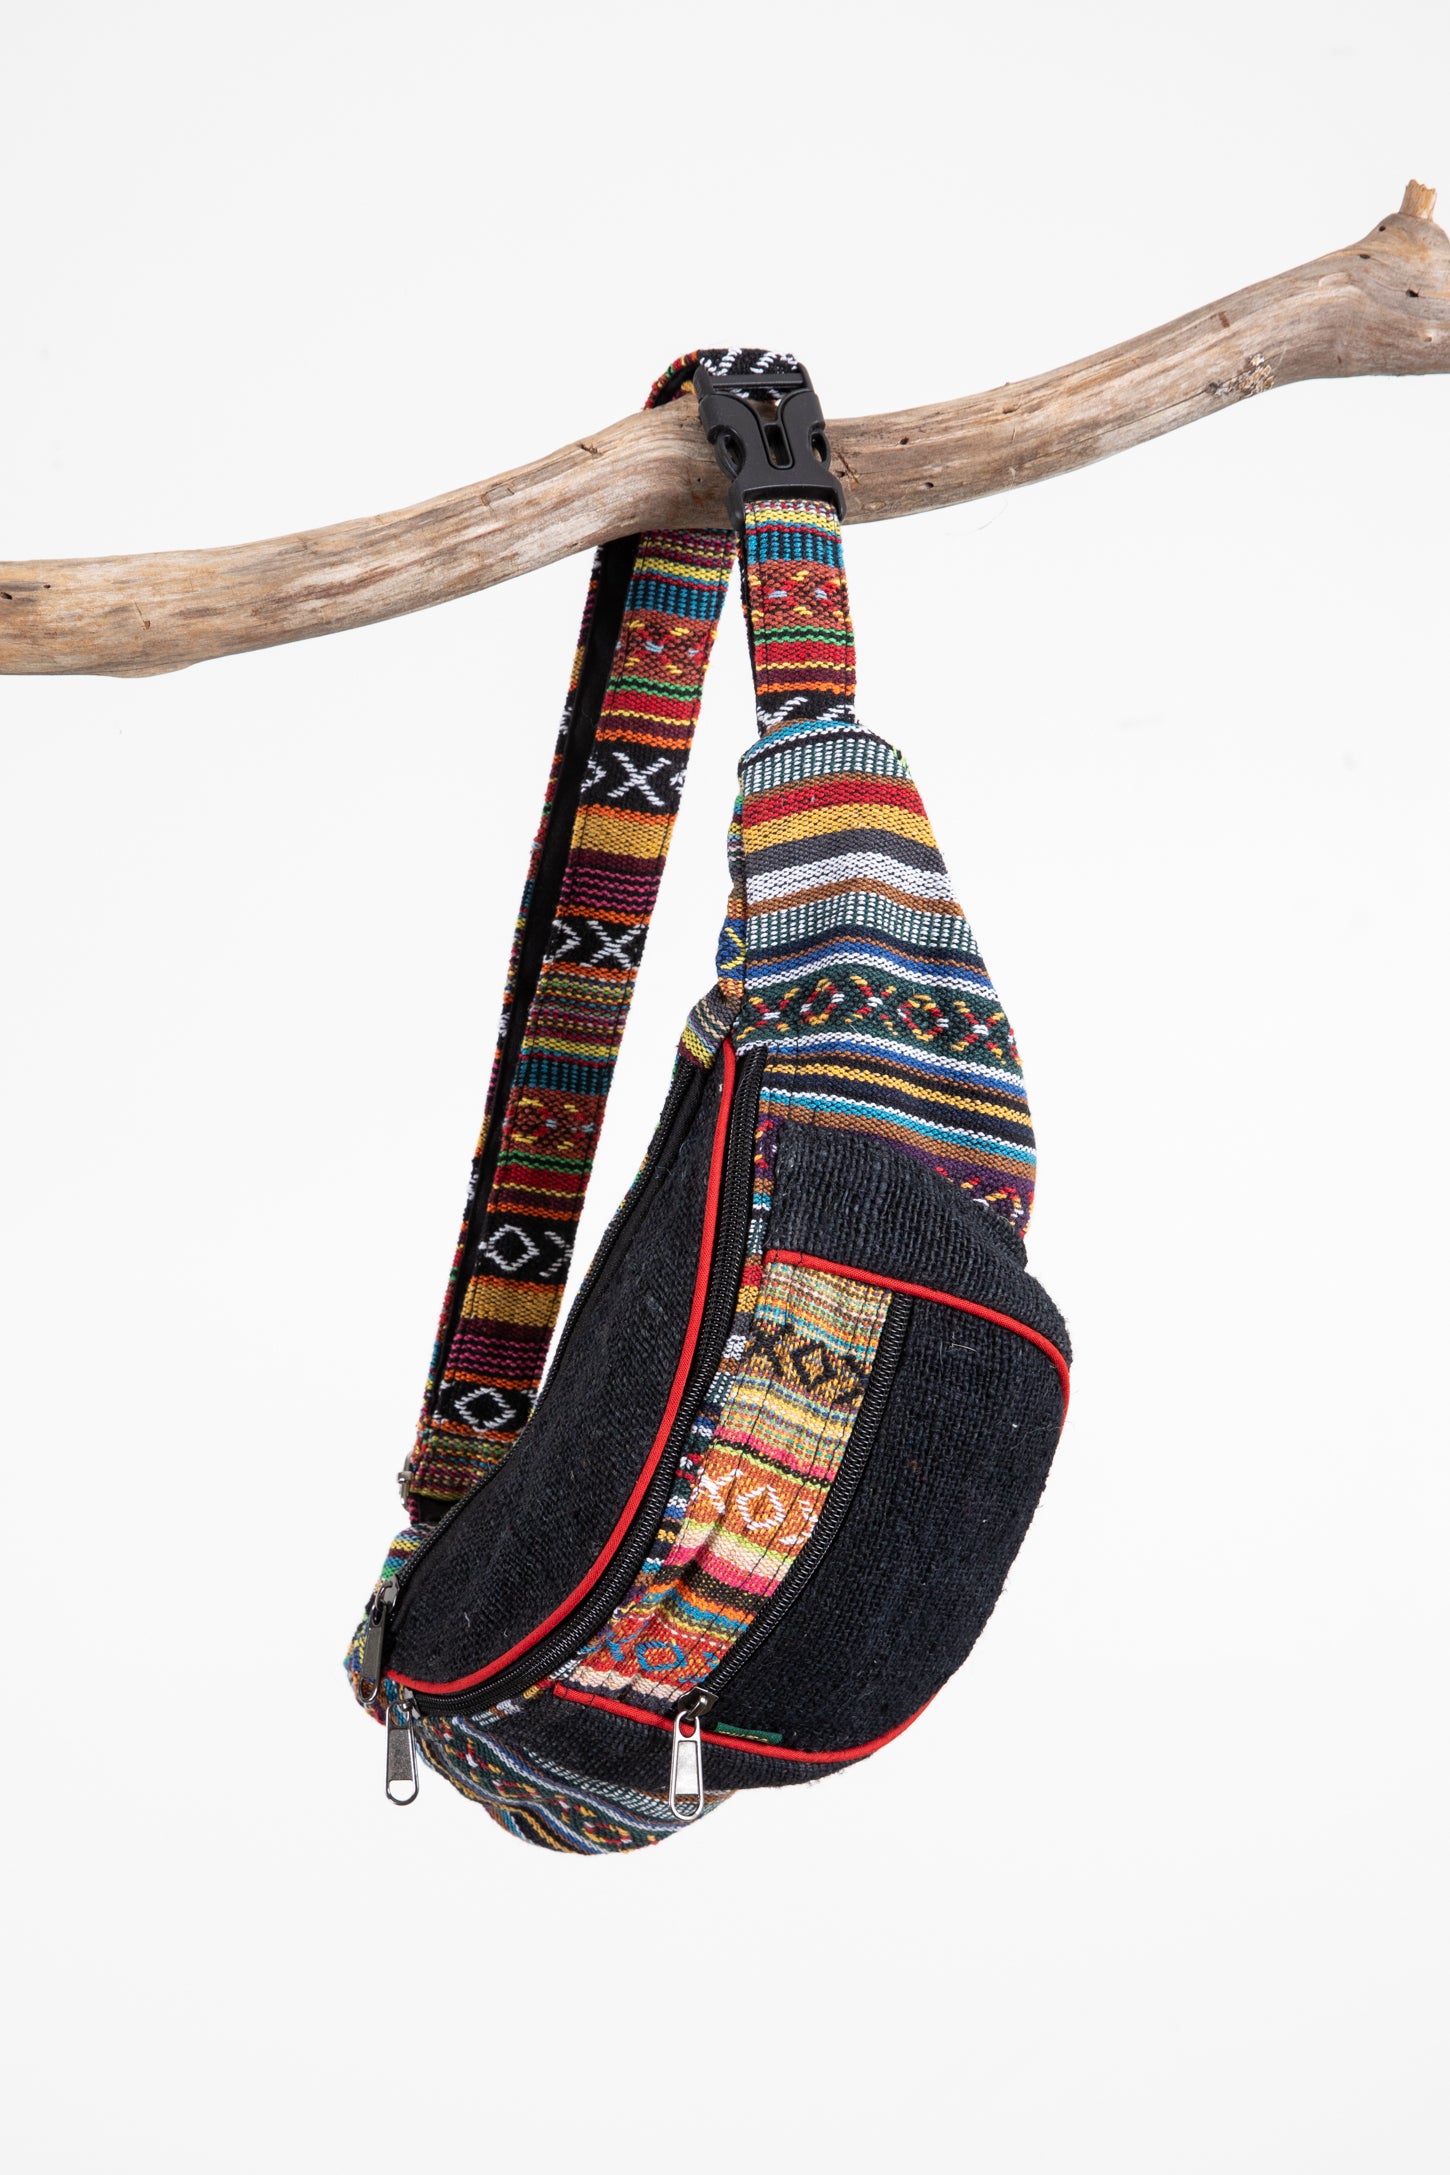 Gherry Hemp Fanny Pack Black with Multicolor